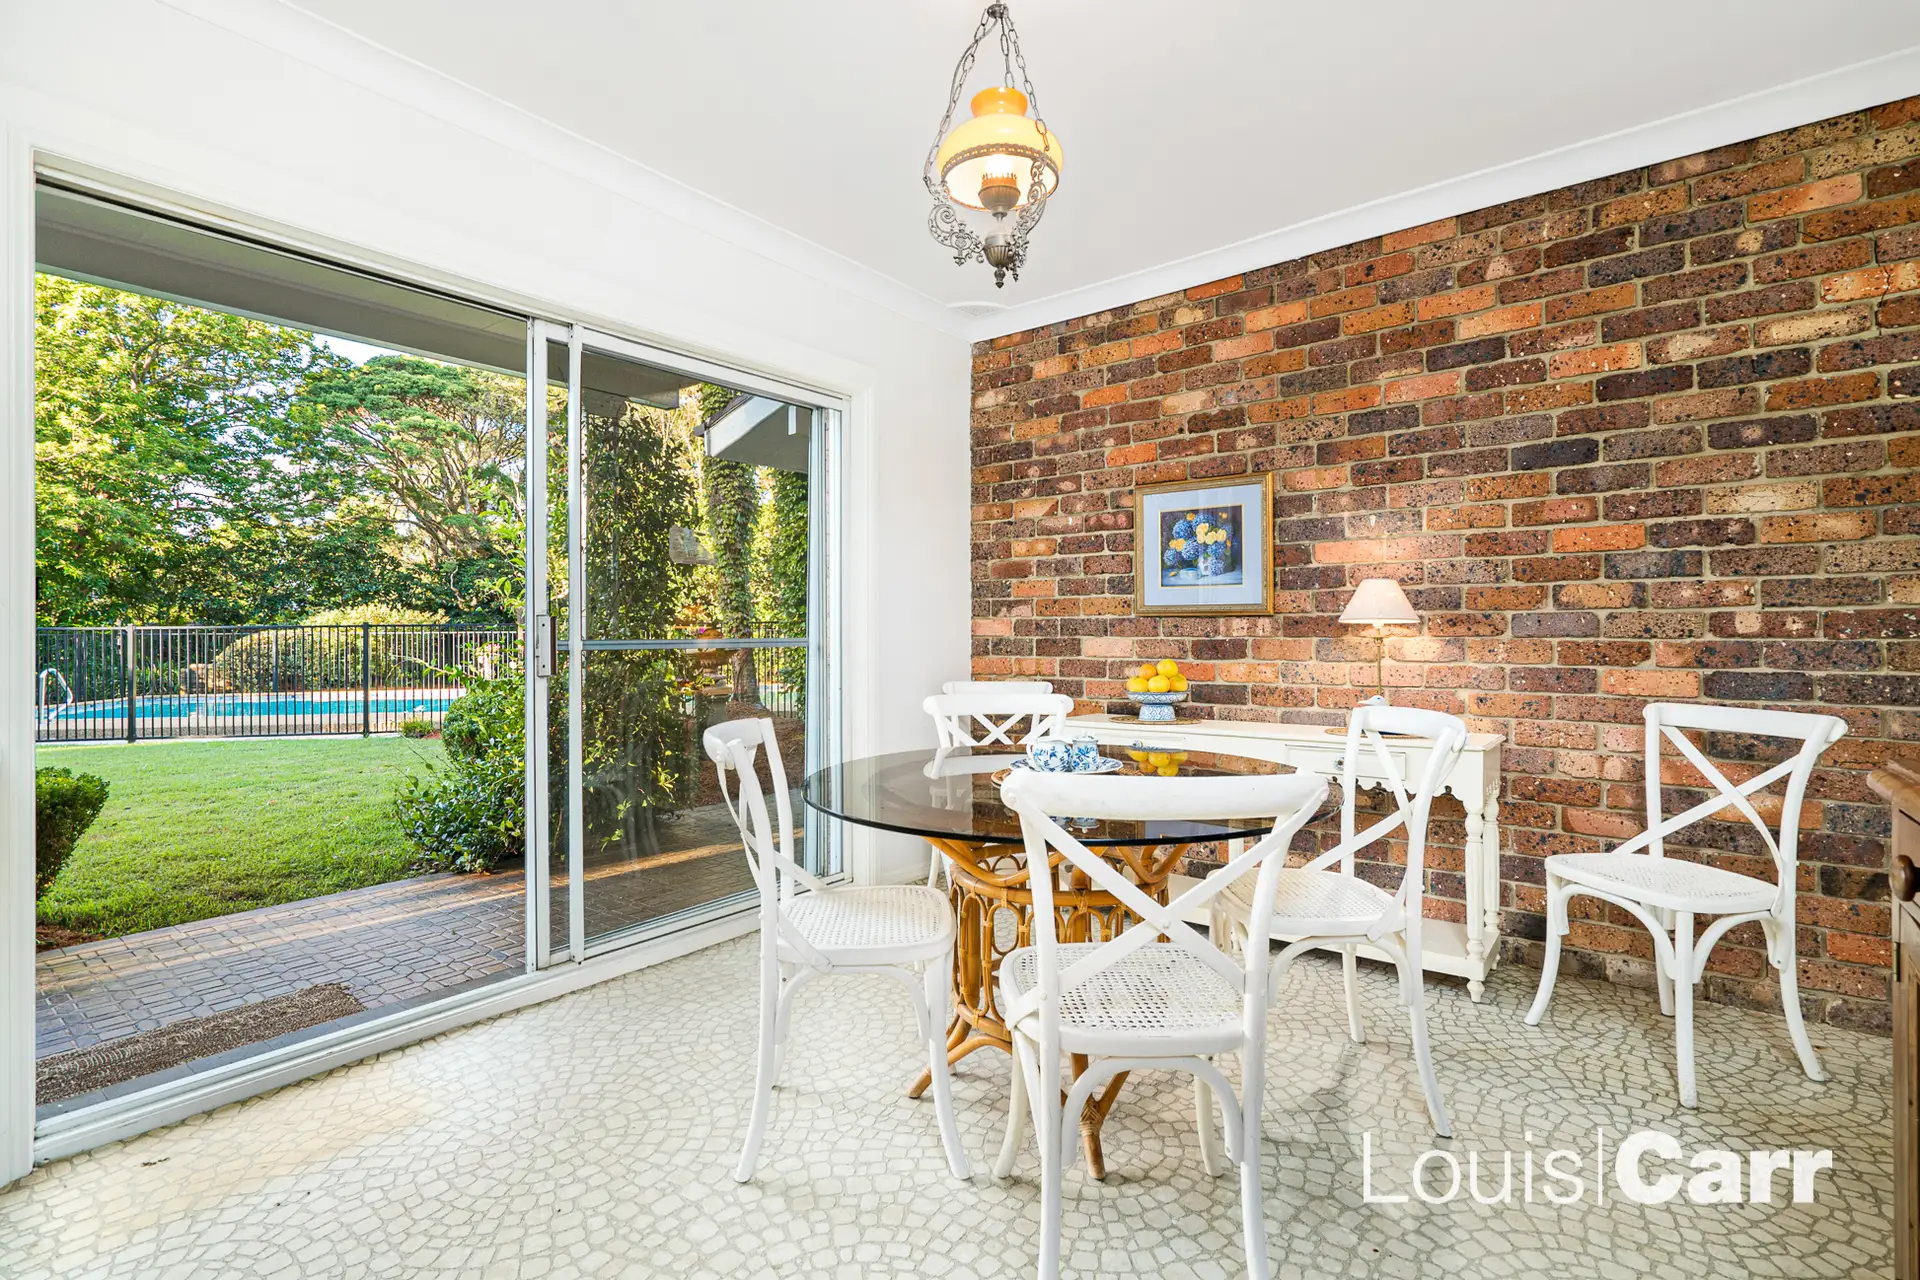 Photo #10: 2 Gumnut Road, Cherrybrook - Sold by Louis Carr Real Estate